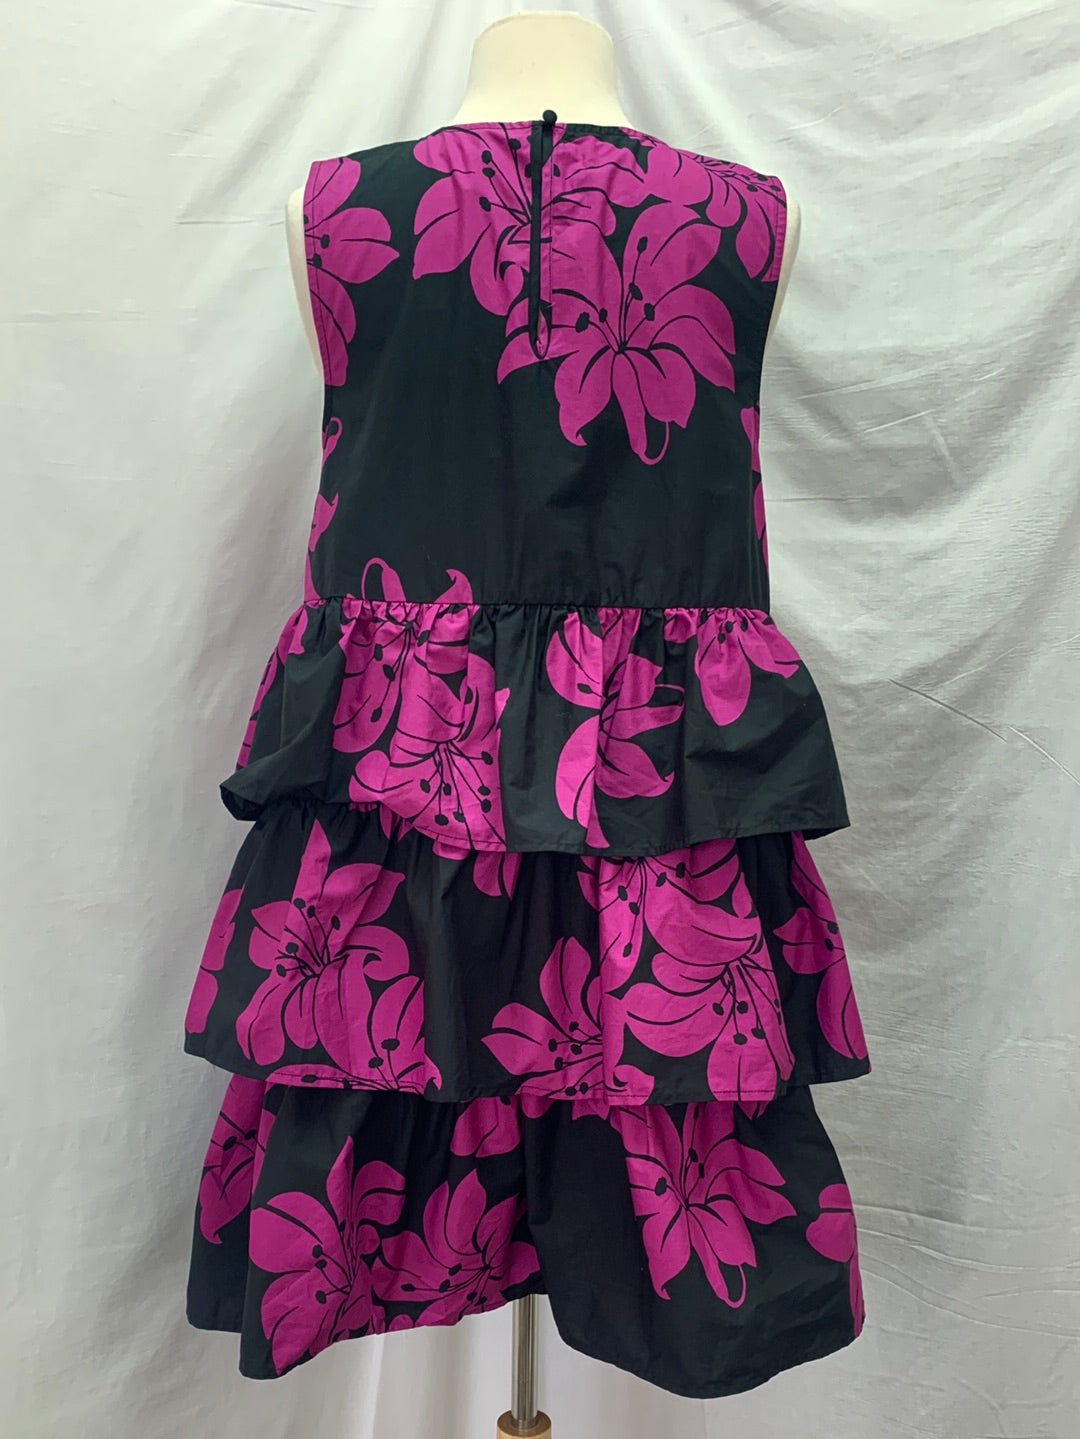 NWT - WHO WHAT WEAR purple floral Hot Hibiscus Sleeveless Ruffle Dress - Small